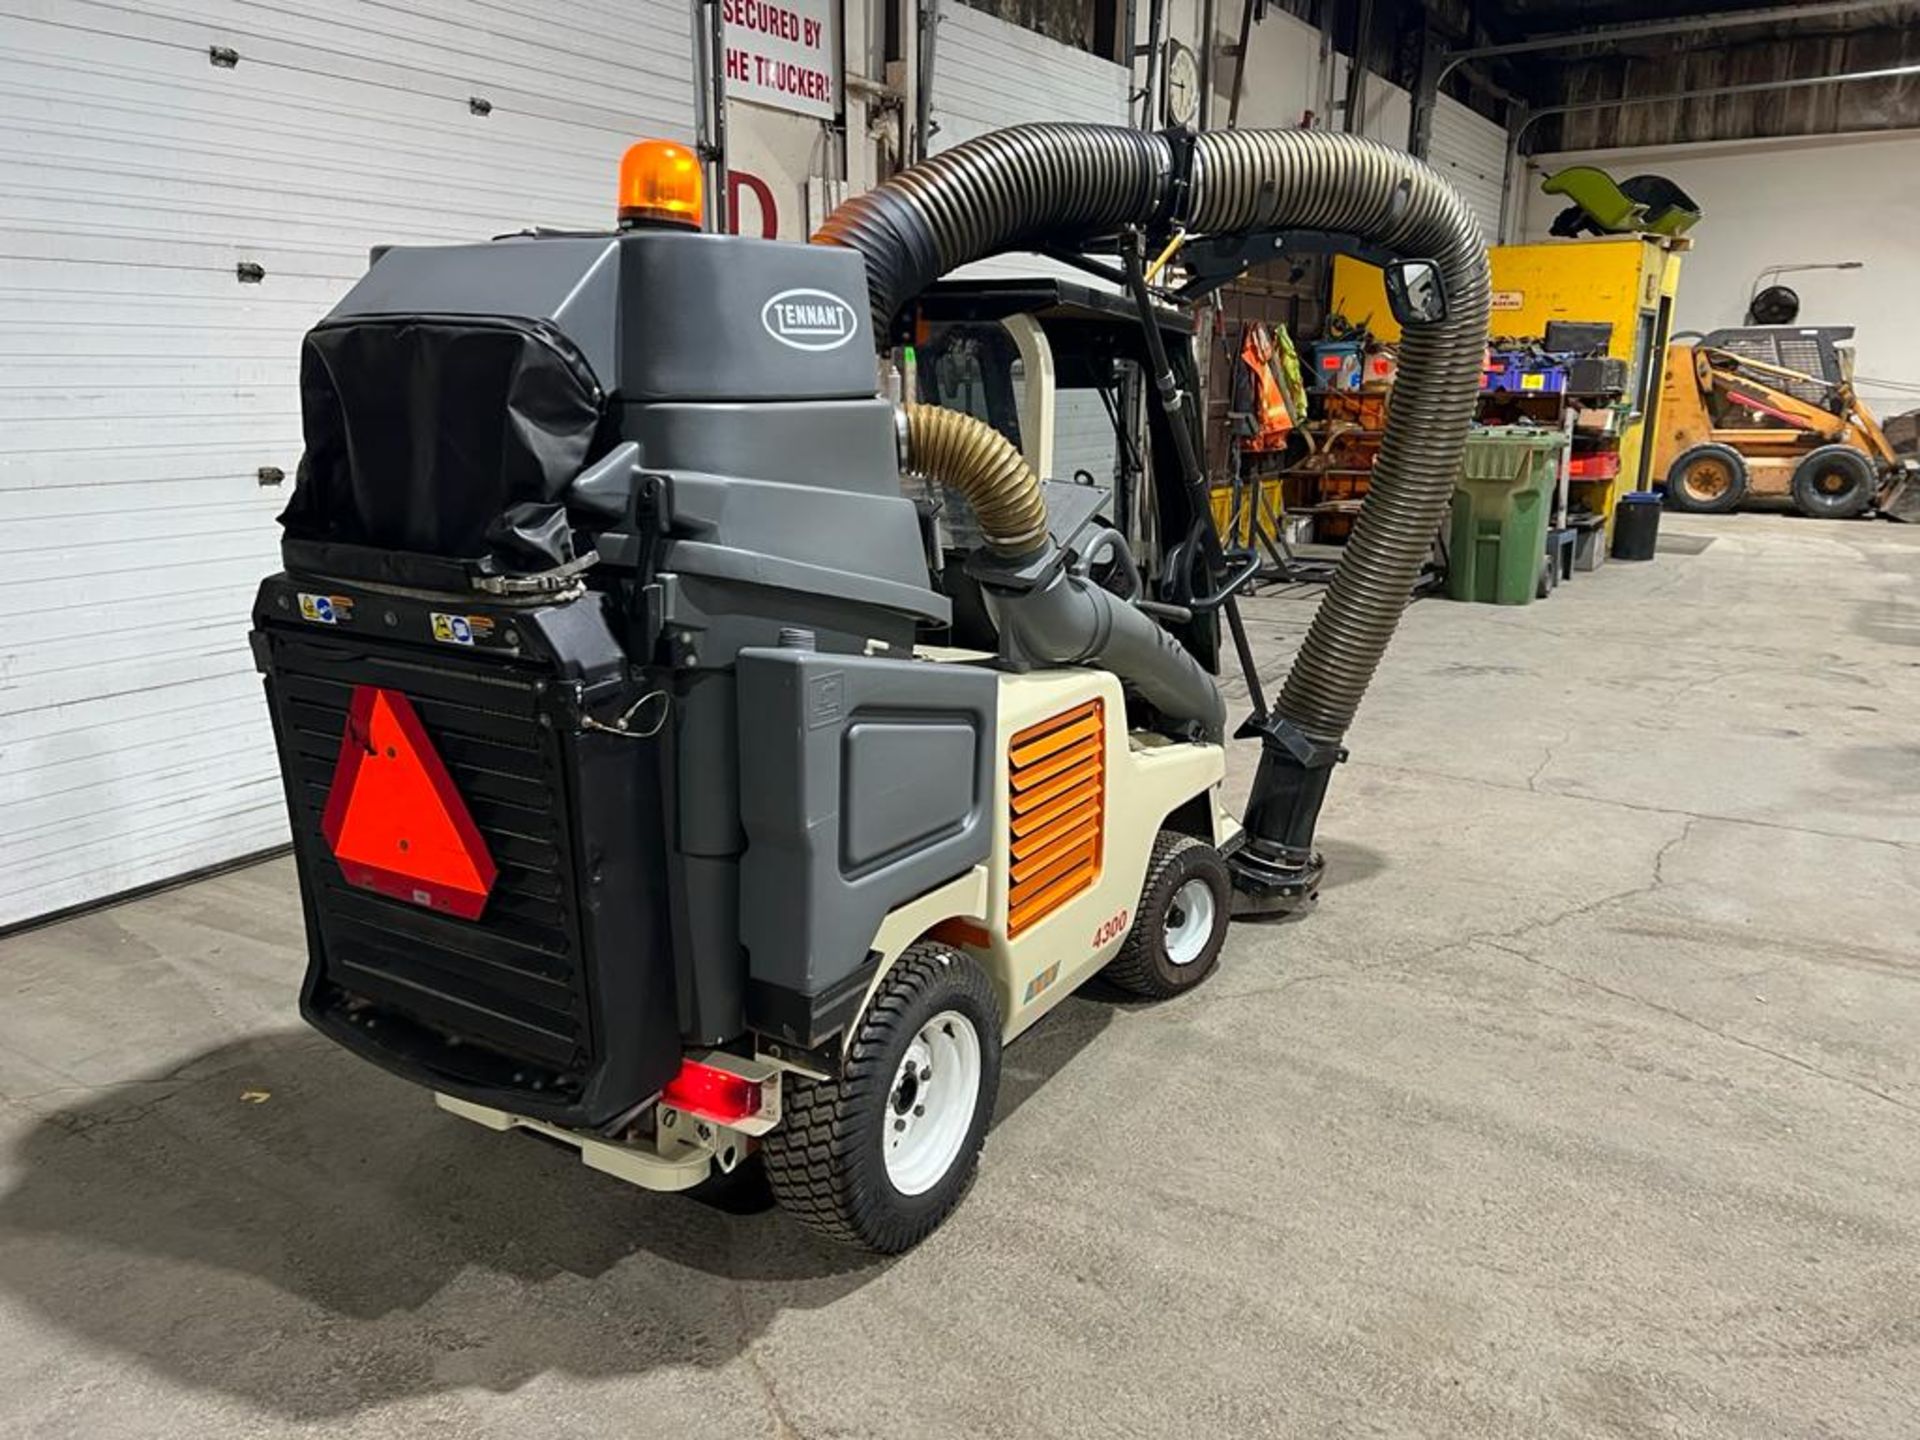 NICE Tennant Model ATLV-4300 Ride On Vacuum Sweeper Indoor Outdoor LPG (propane) with LOW HOURS ( - Image 2 of 5